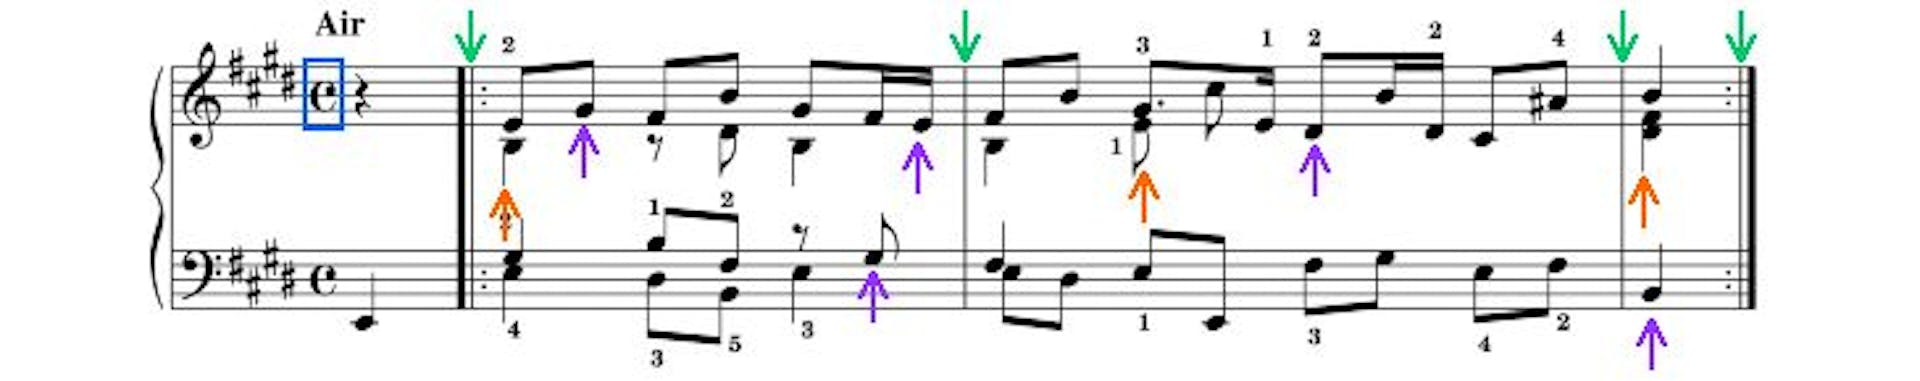 Musical chords are marked with orange arrows